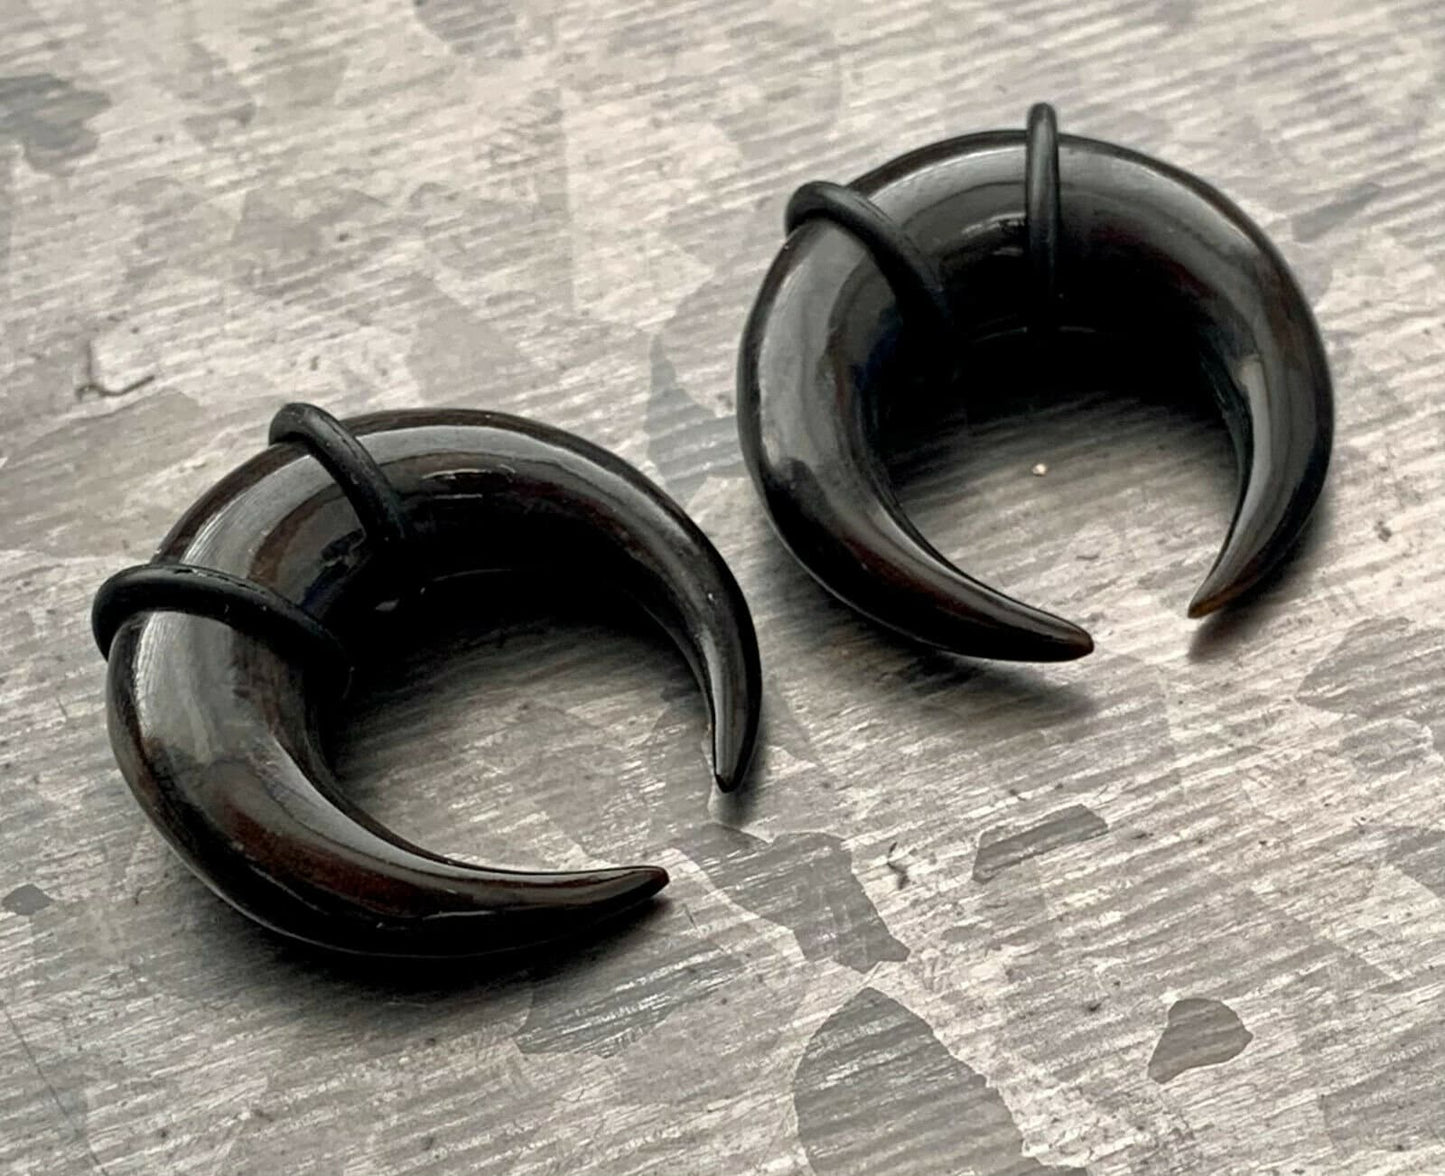 PAIR of Organic Farmed Buffalo Horn Tapers/Plugs with O-Rings - Expanders - Gauges 8g (3mm) thru 0g (8mm) Available!